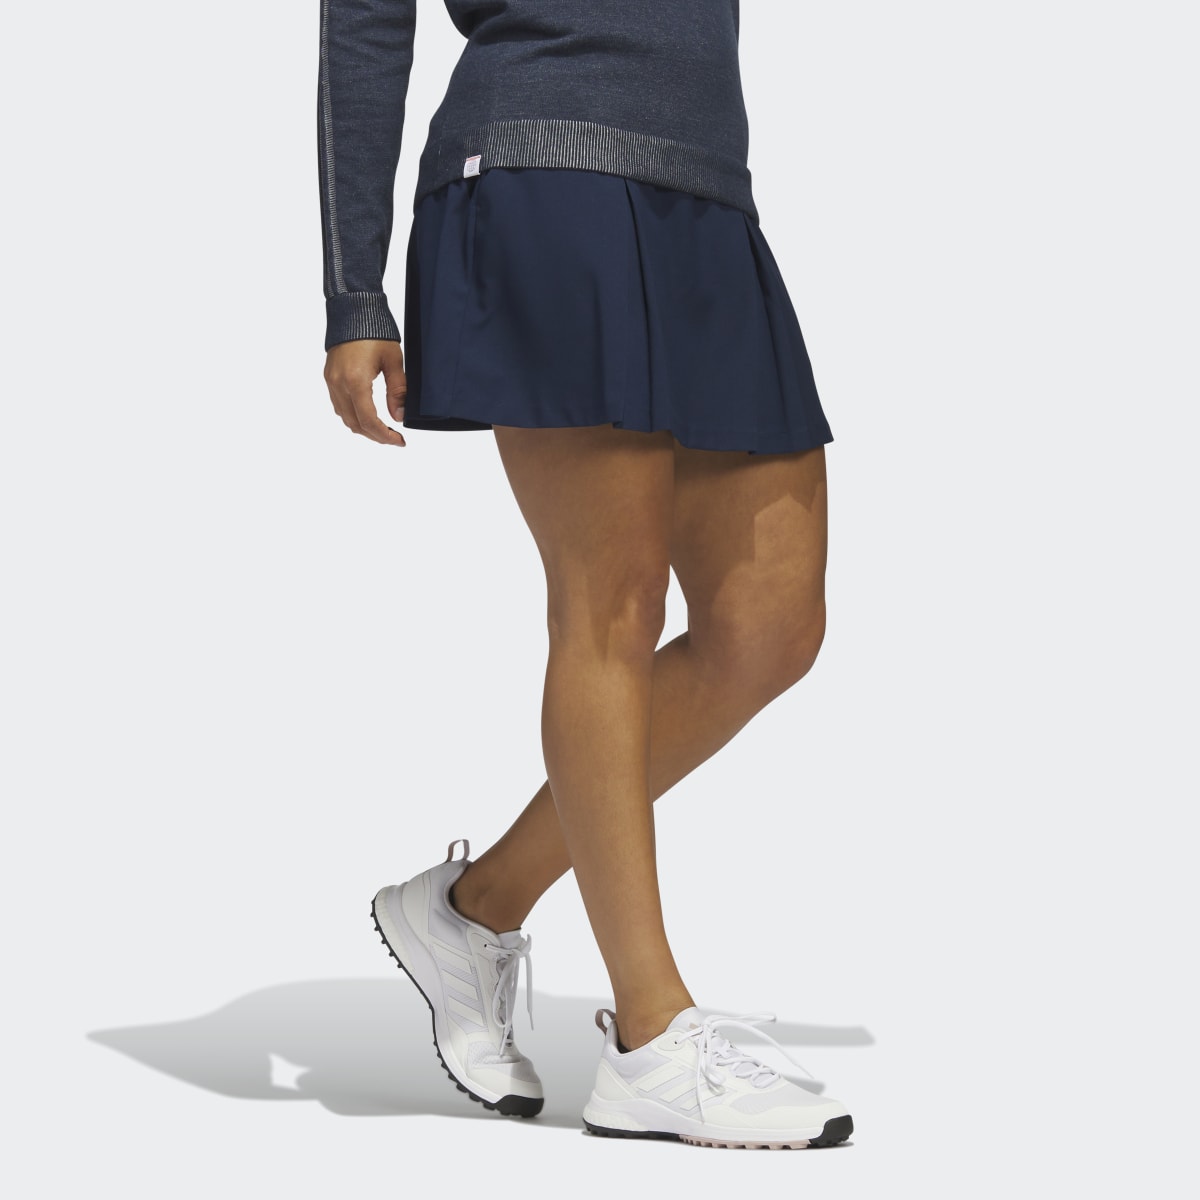 Adidas Made To Be Remade Flare Golf Skirt. 4